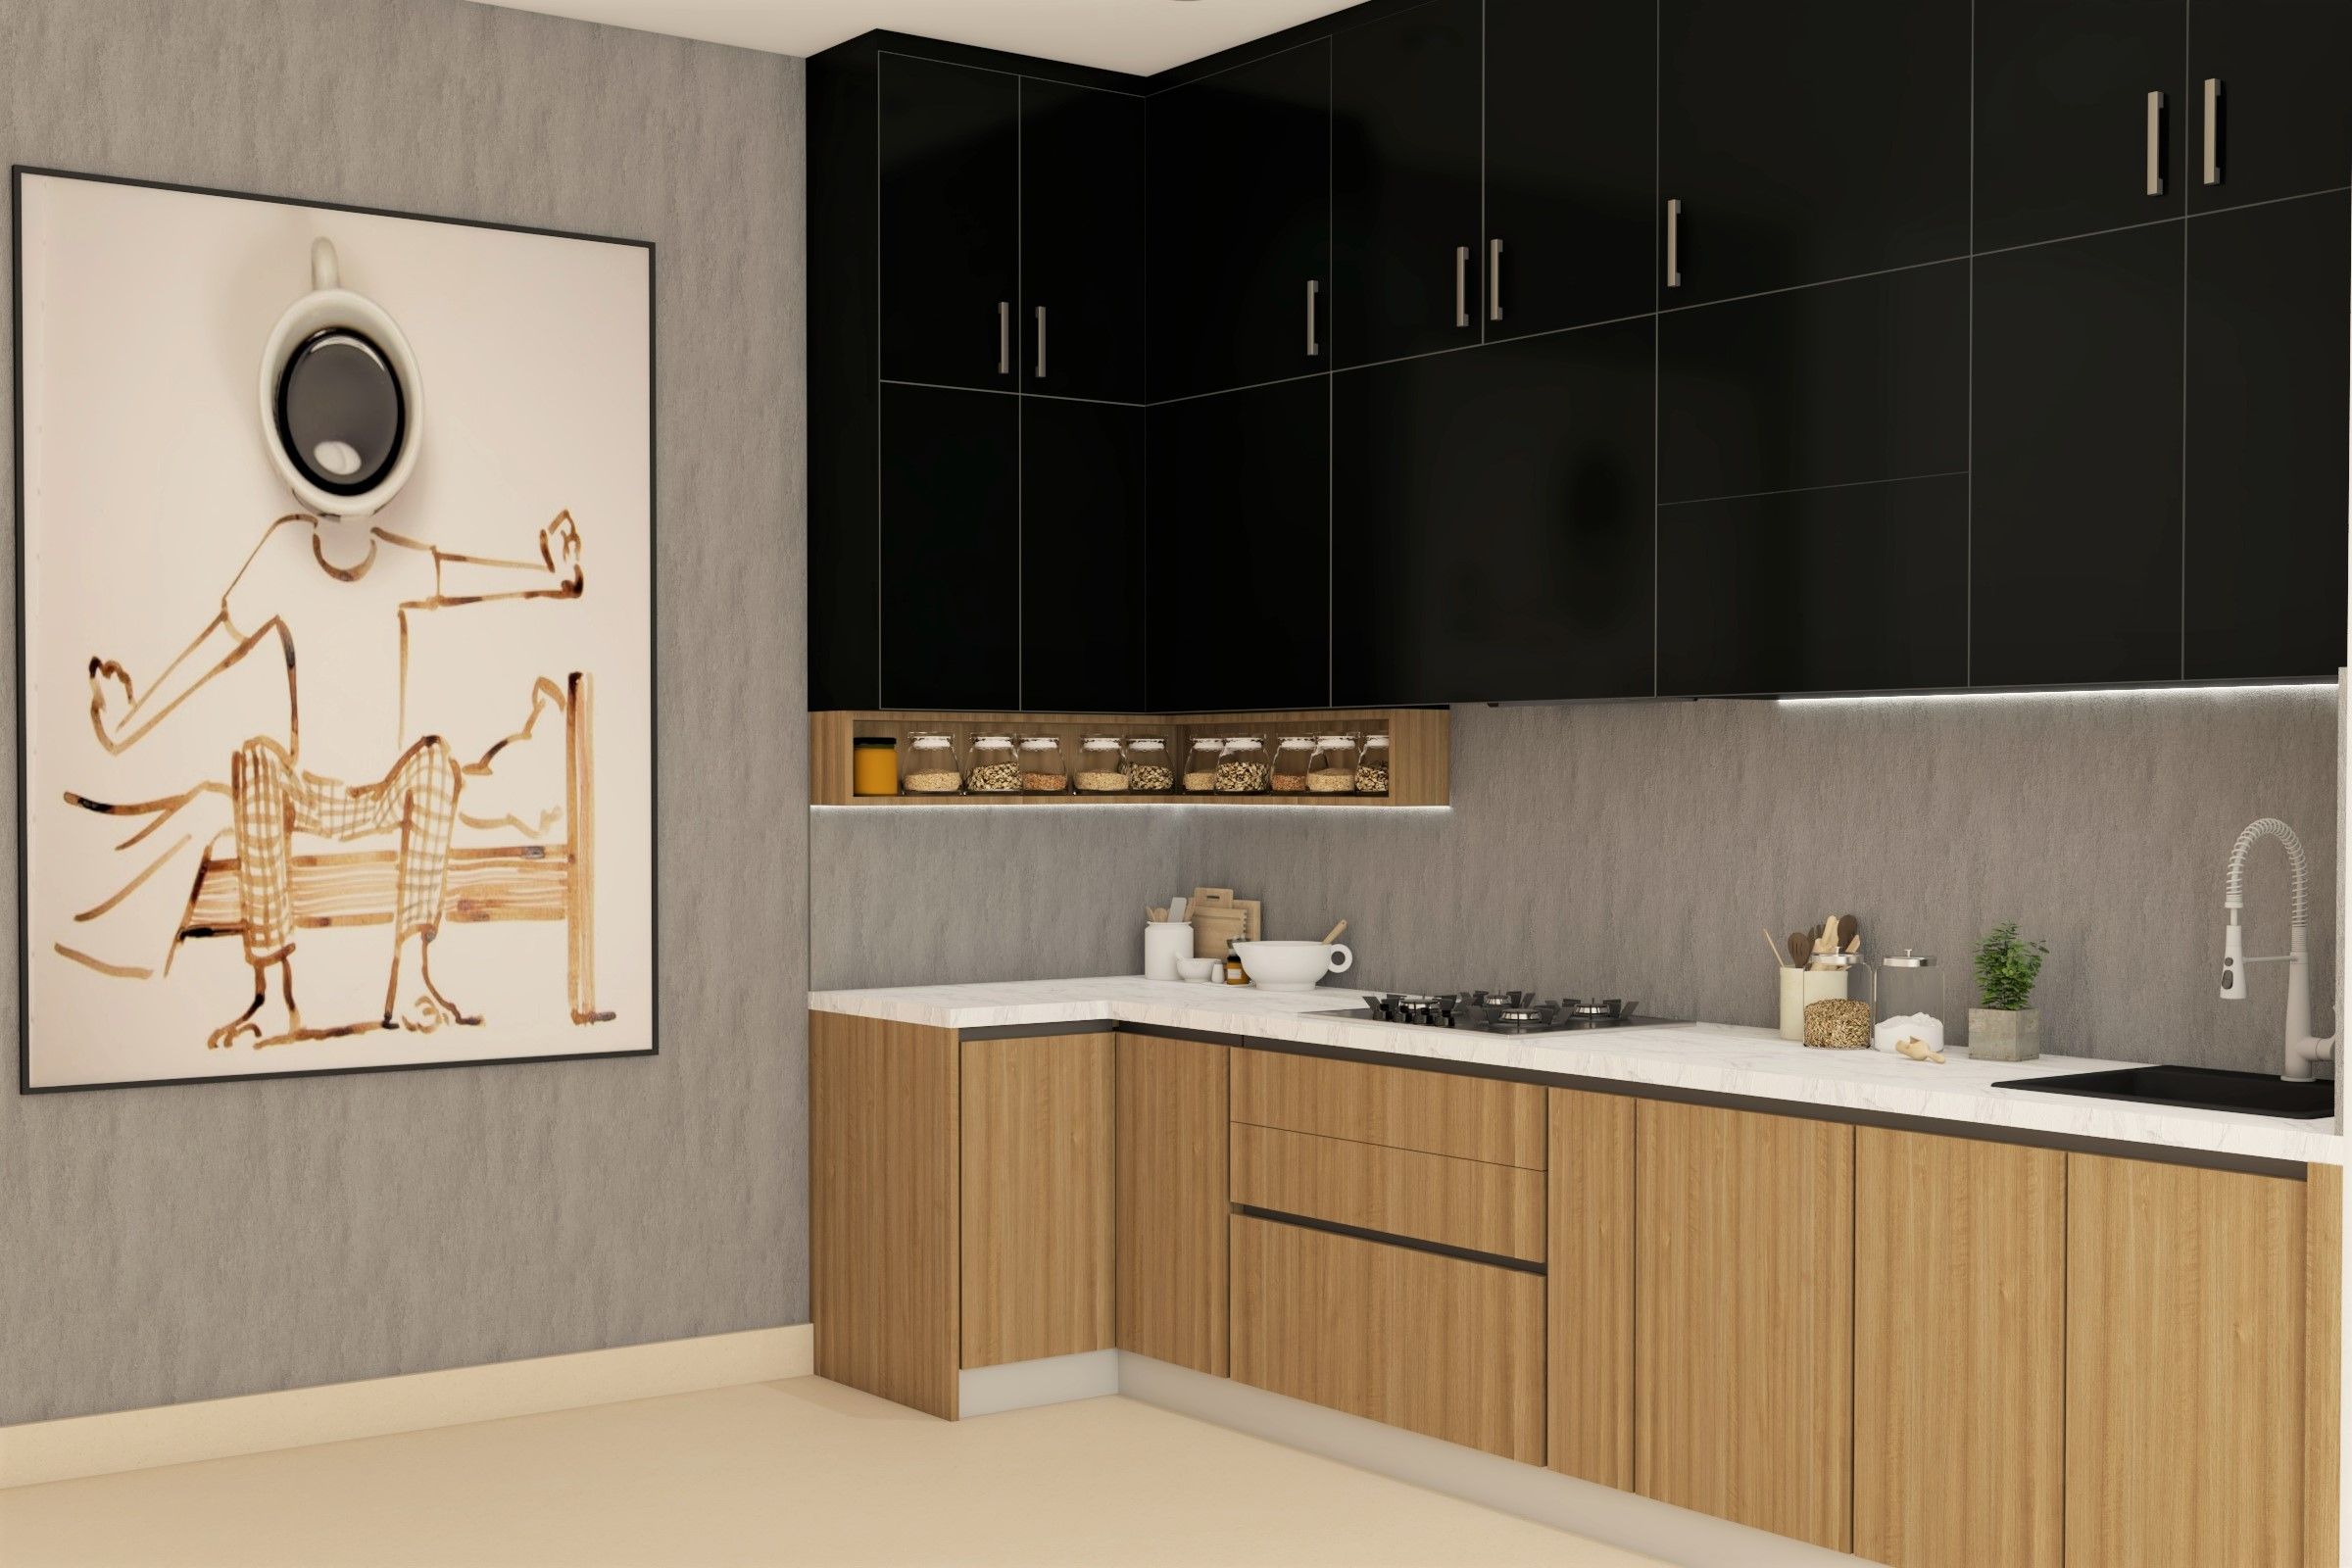 Modern Kitchen Design With Upper Black And Lower Wooden Cabinets